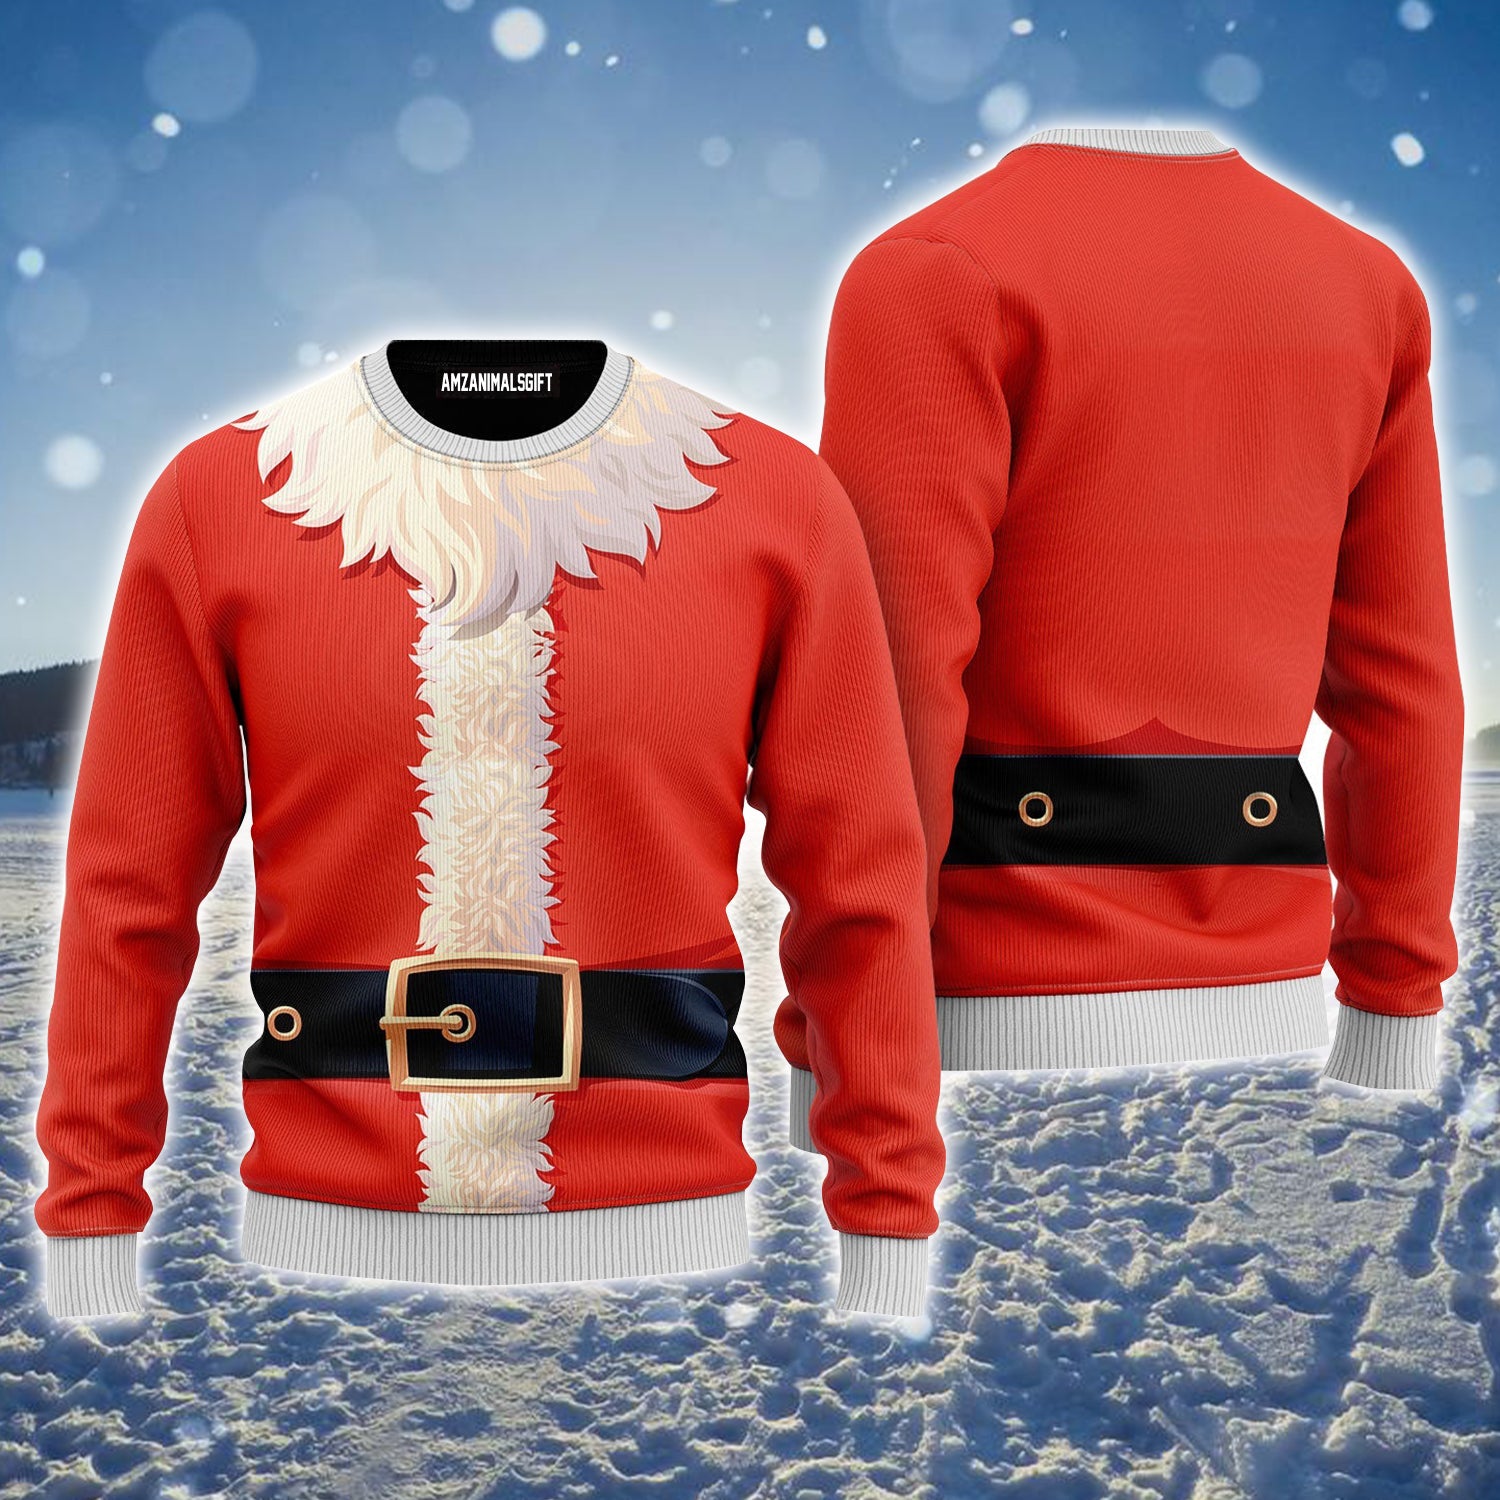 Santa Claus Costume Cosplay Pattern Ugly Christmas Sweater, Funny Christmas Ugly Sweater For Men & Women - Perfect Gift For Christmas, Friend, Family